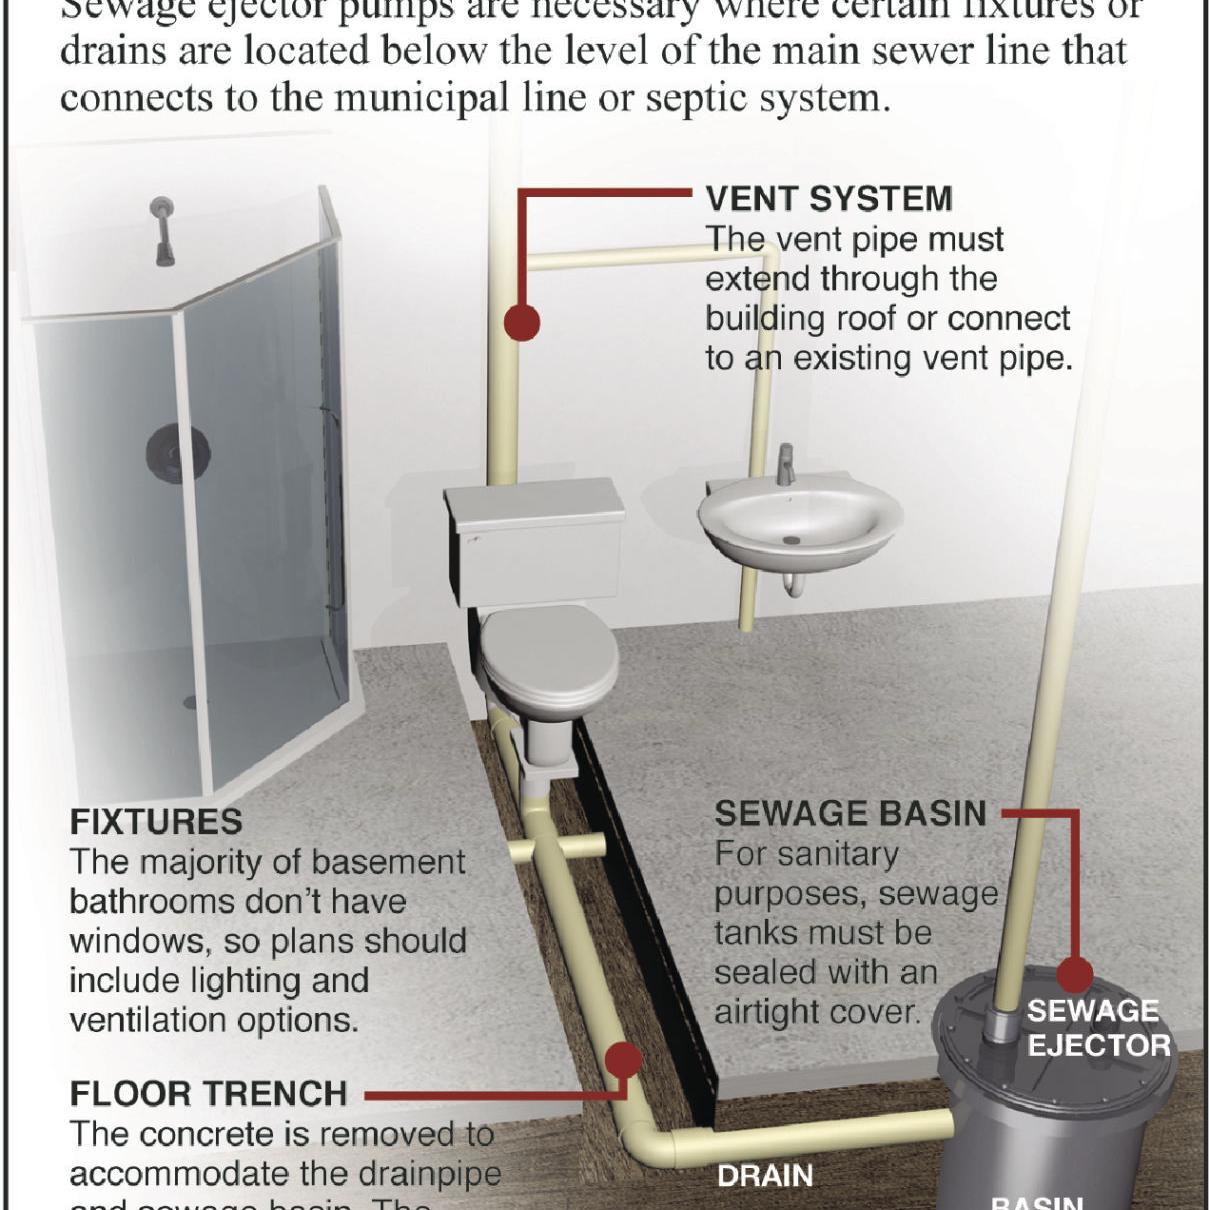 How To Install A New Bathroom On Concrete Slab Or In Basement Siouxland Homes Siouxcityjournal Com - Can You Have A Bathroom In The Basement With Septic System